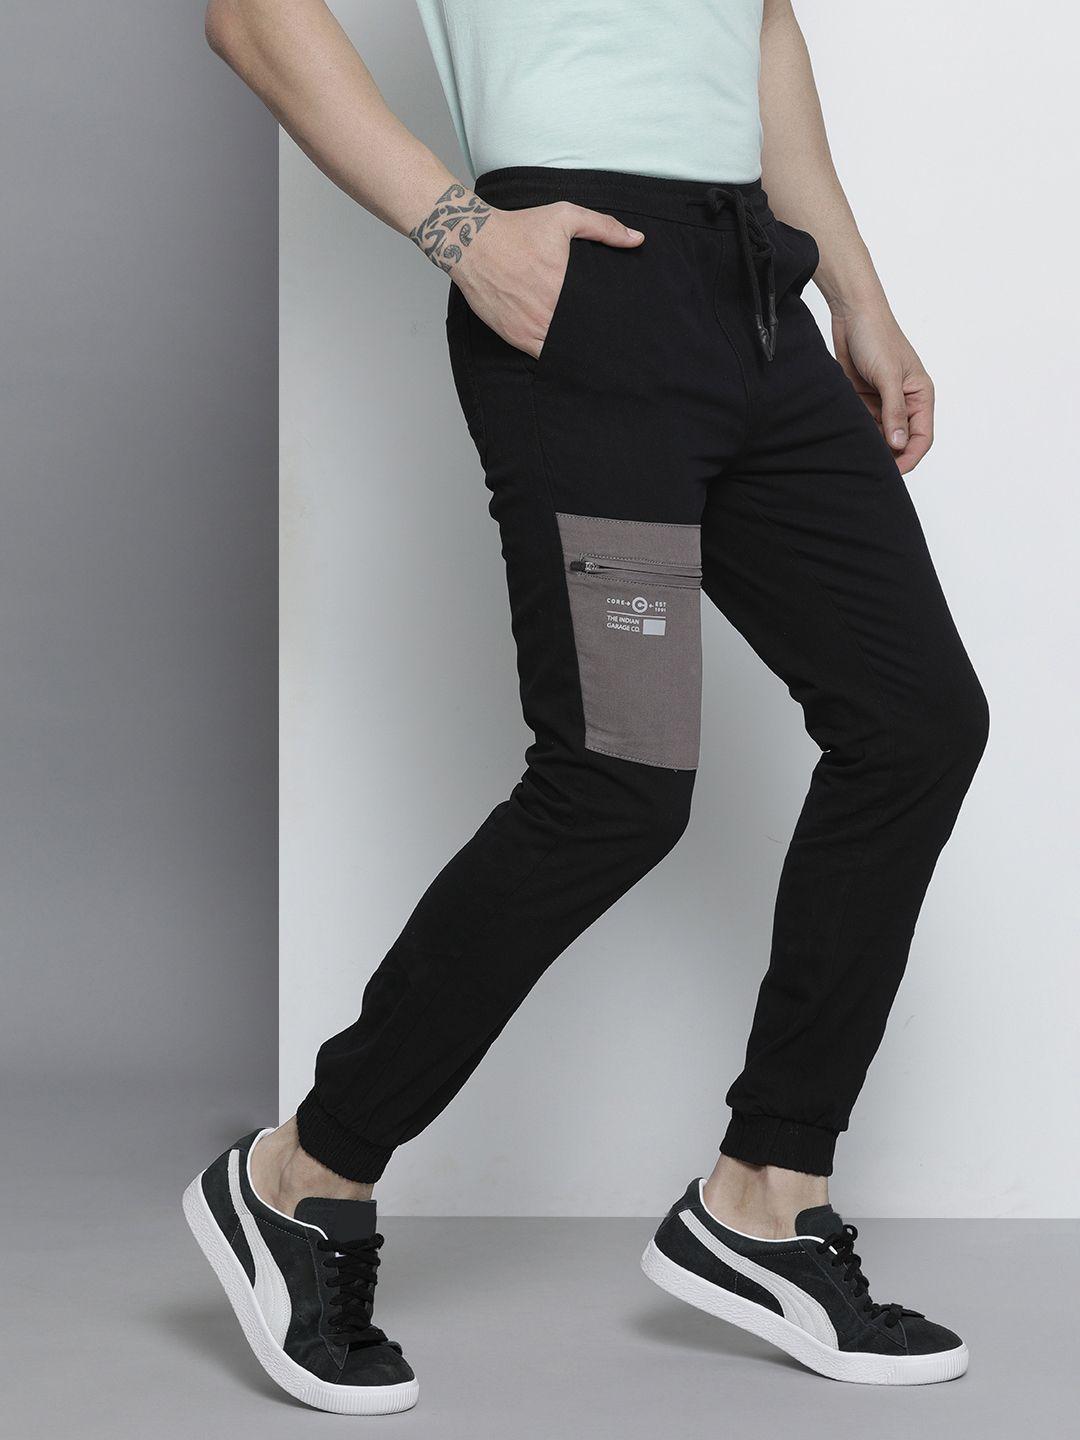 the-indian-garage-co-men-black-printed-joggers-trousers